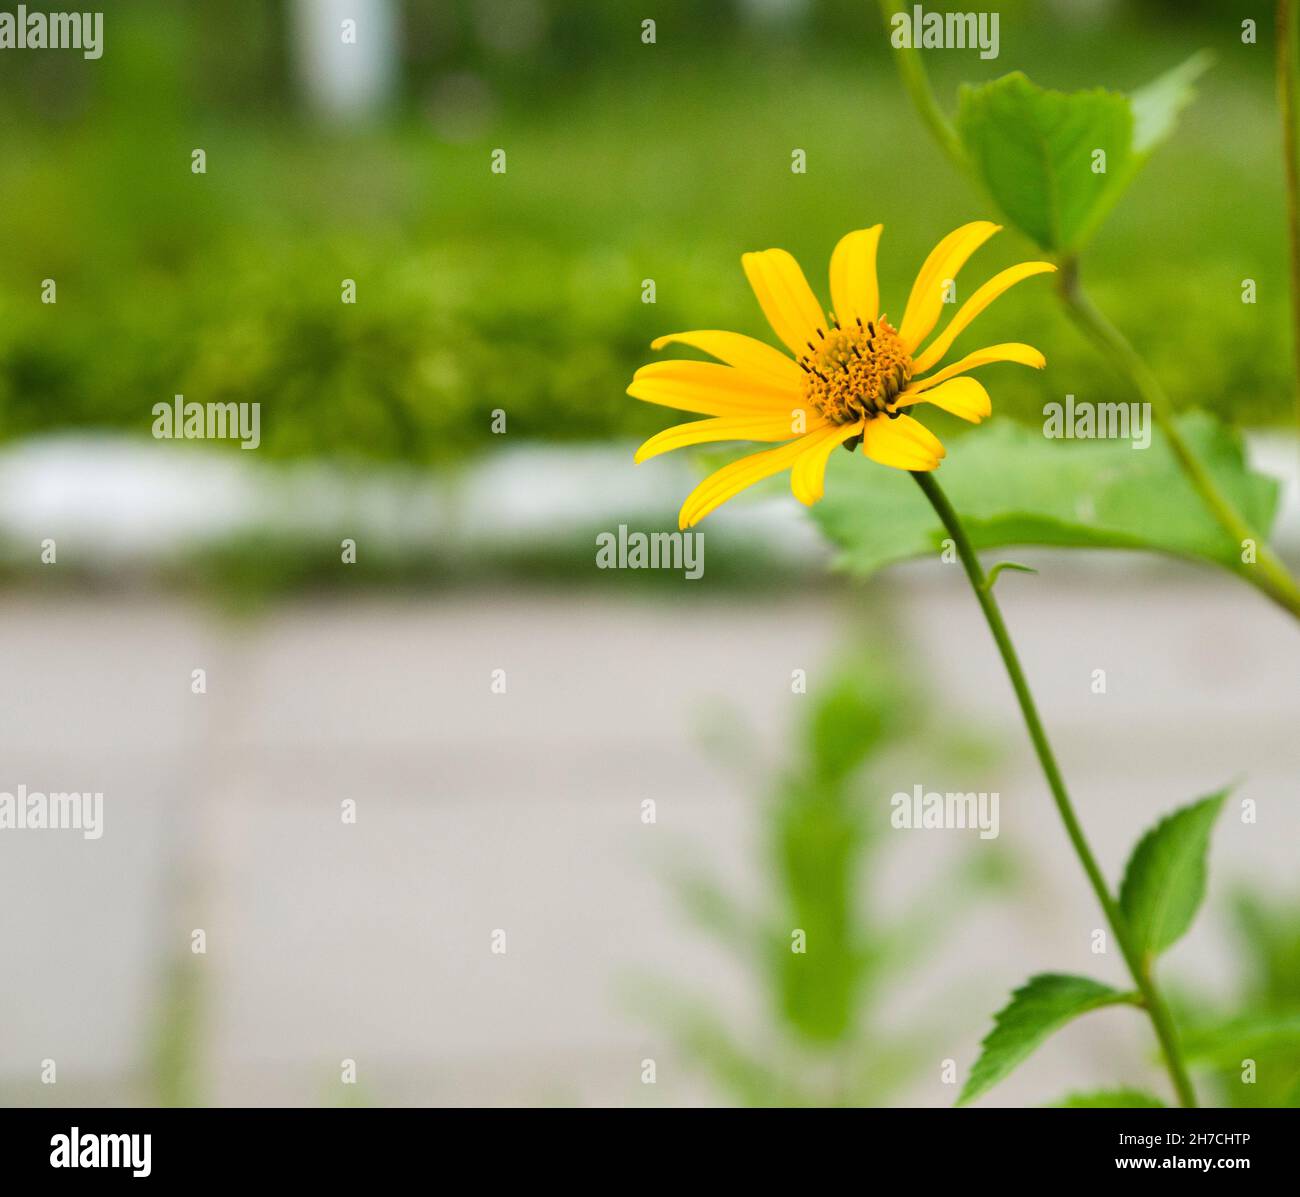 Single yellow flower in bright green grass, spring or summer time Stock Photo